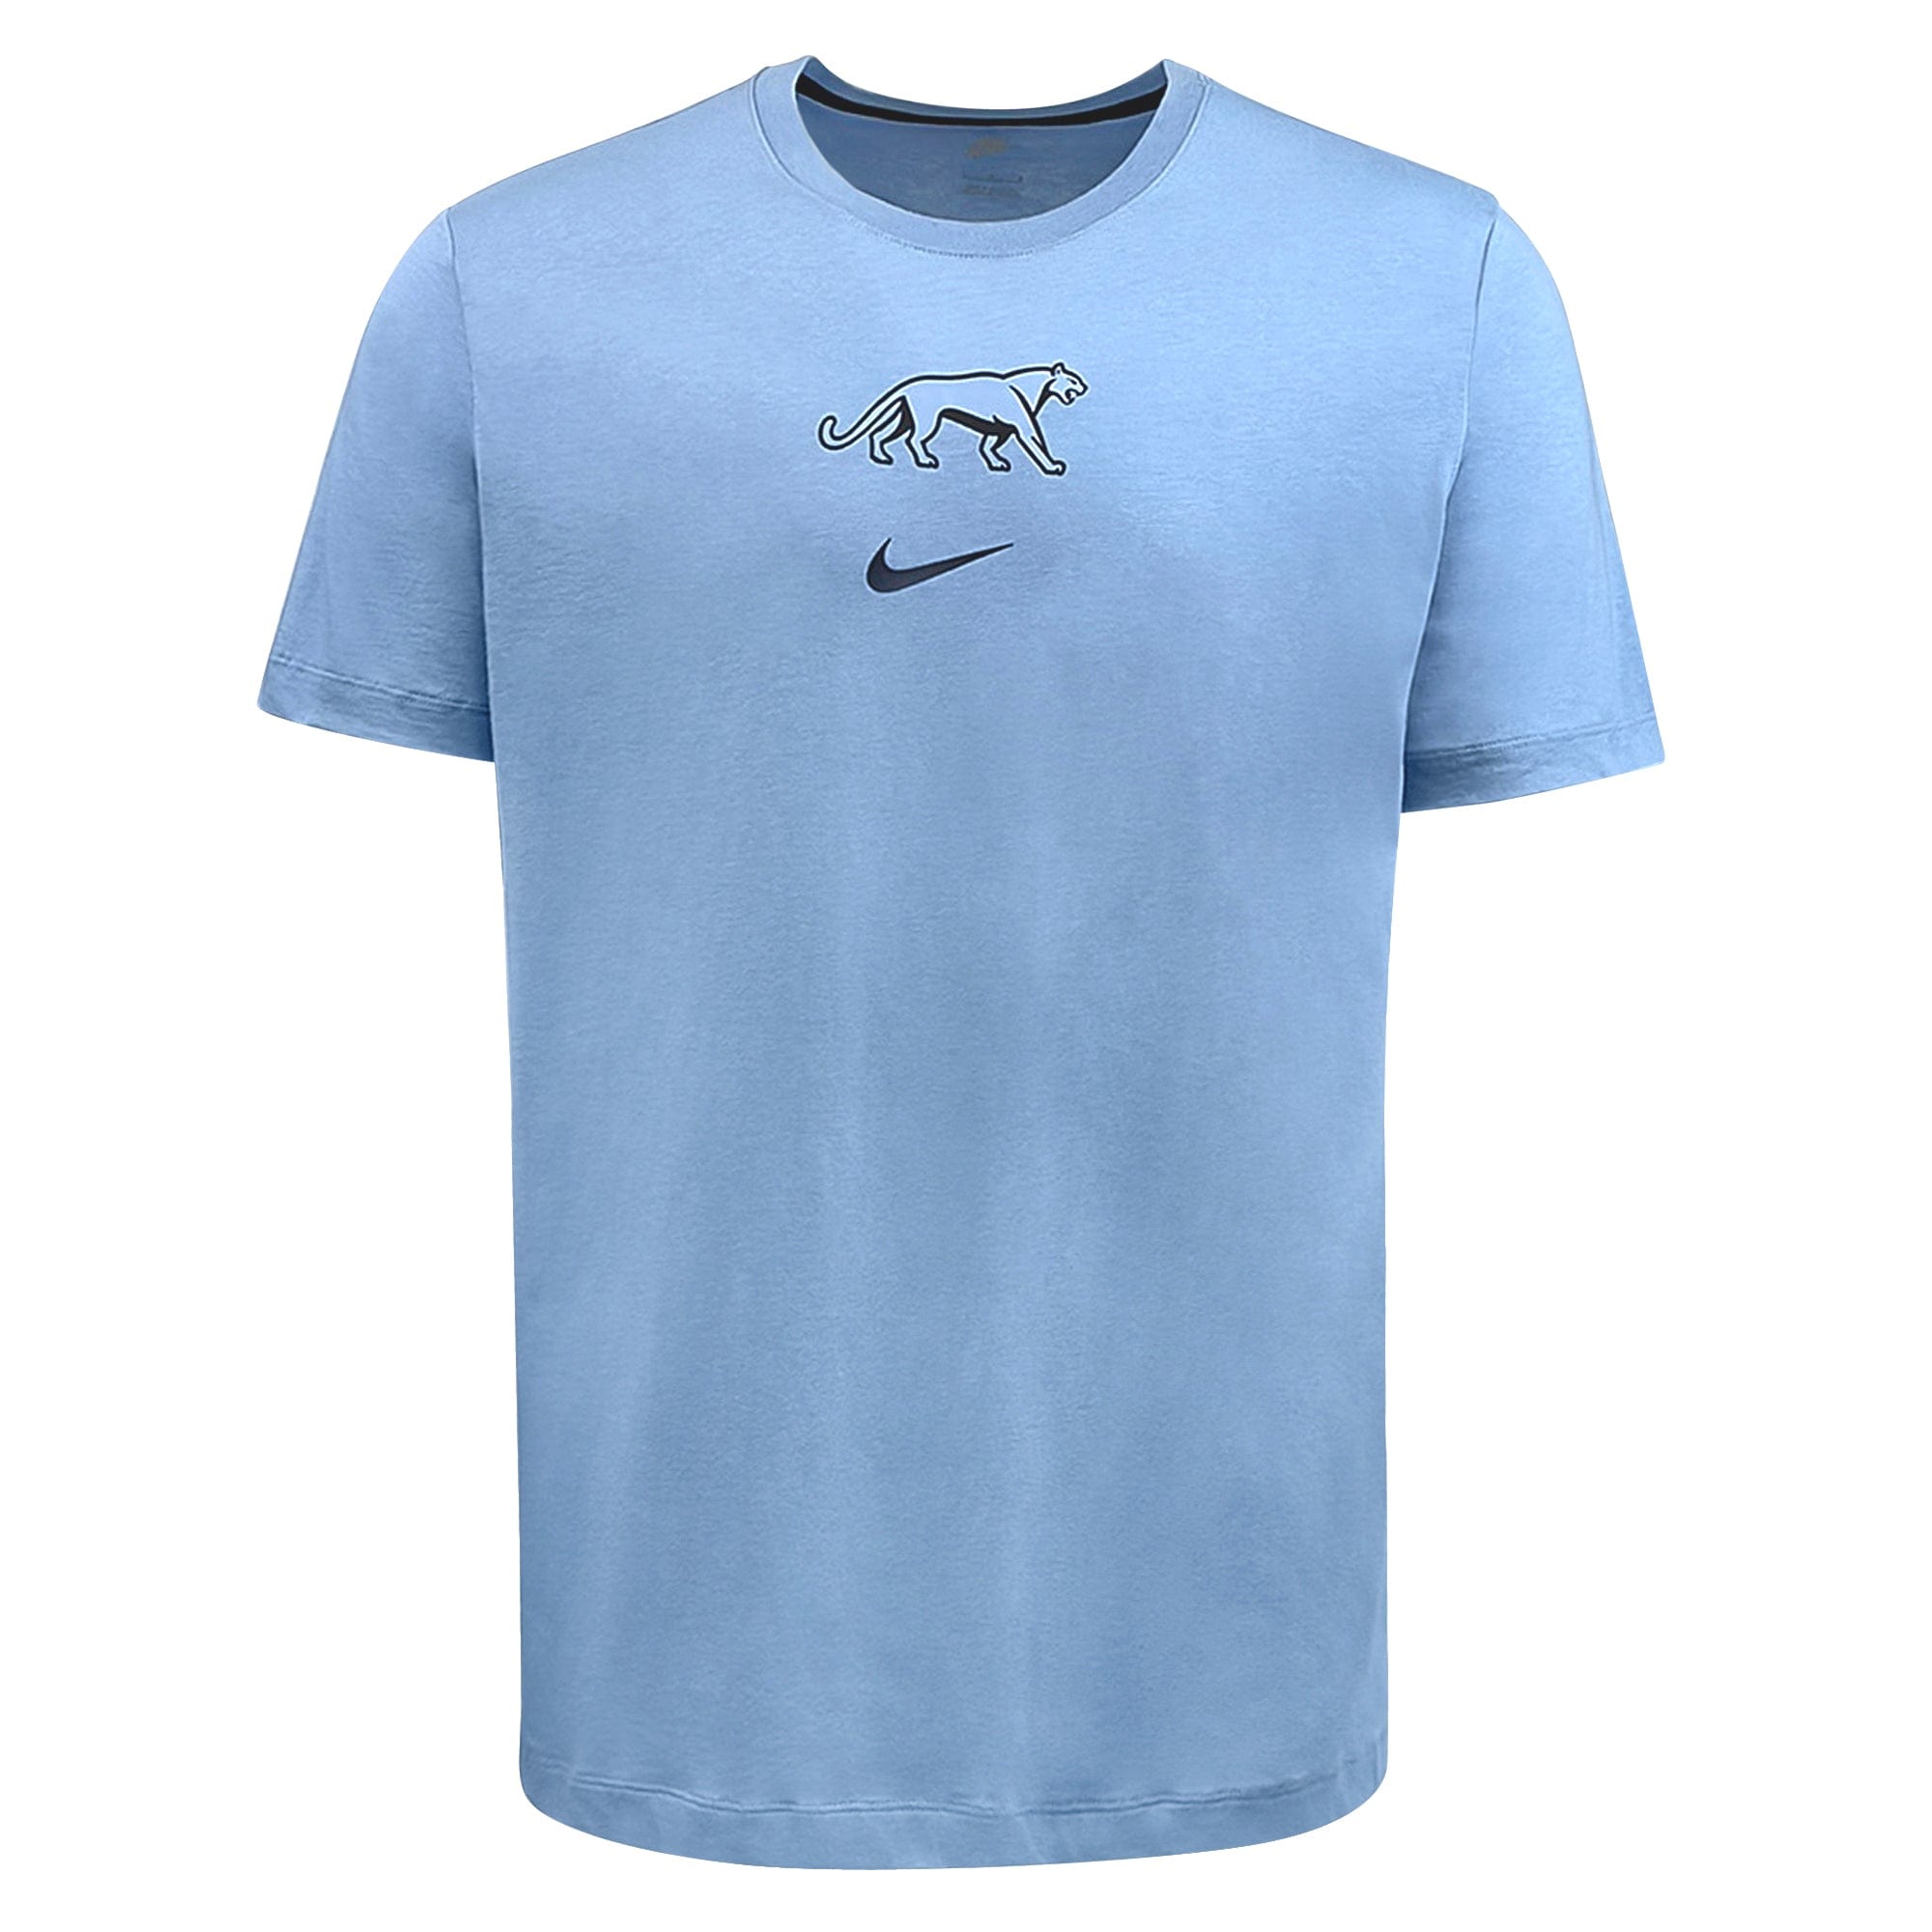 Pumas T-shirt 23/24 by Nike | Argentina Rugby Cotton Tee - World Rugby Shop